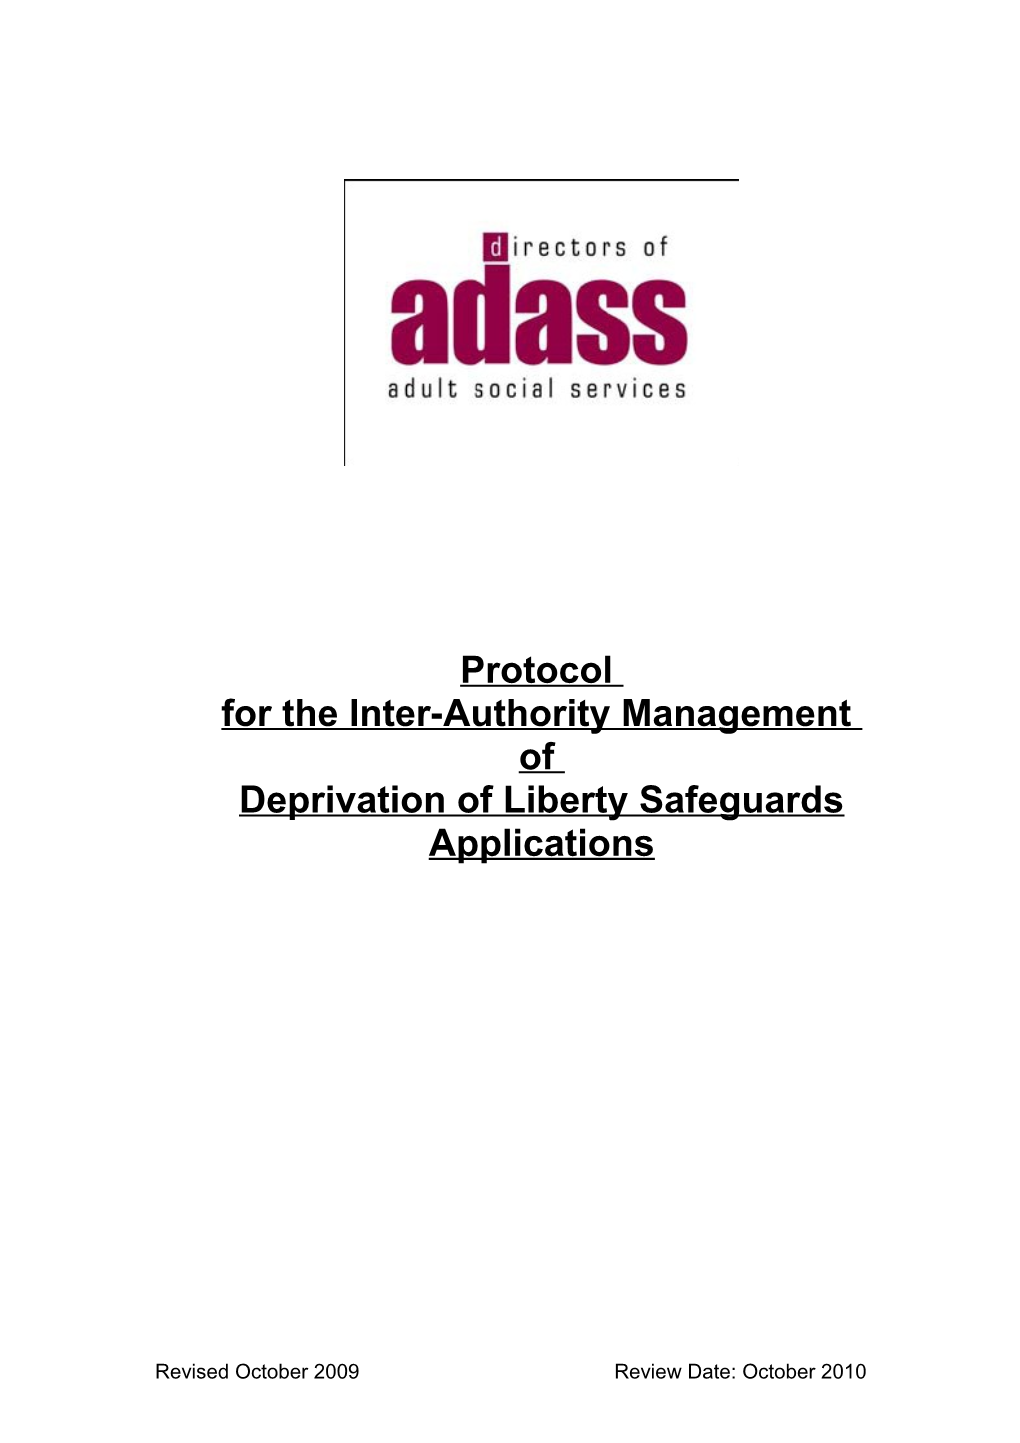 Protocol for the Inter-Authority Management of Deprivation of Liberty Applications